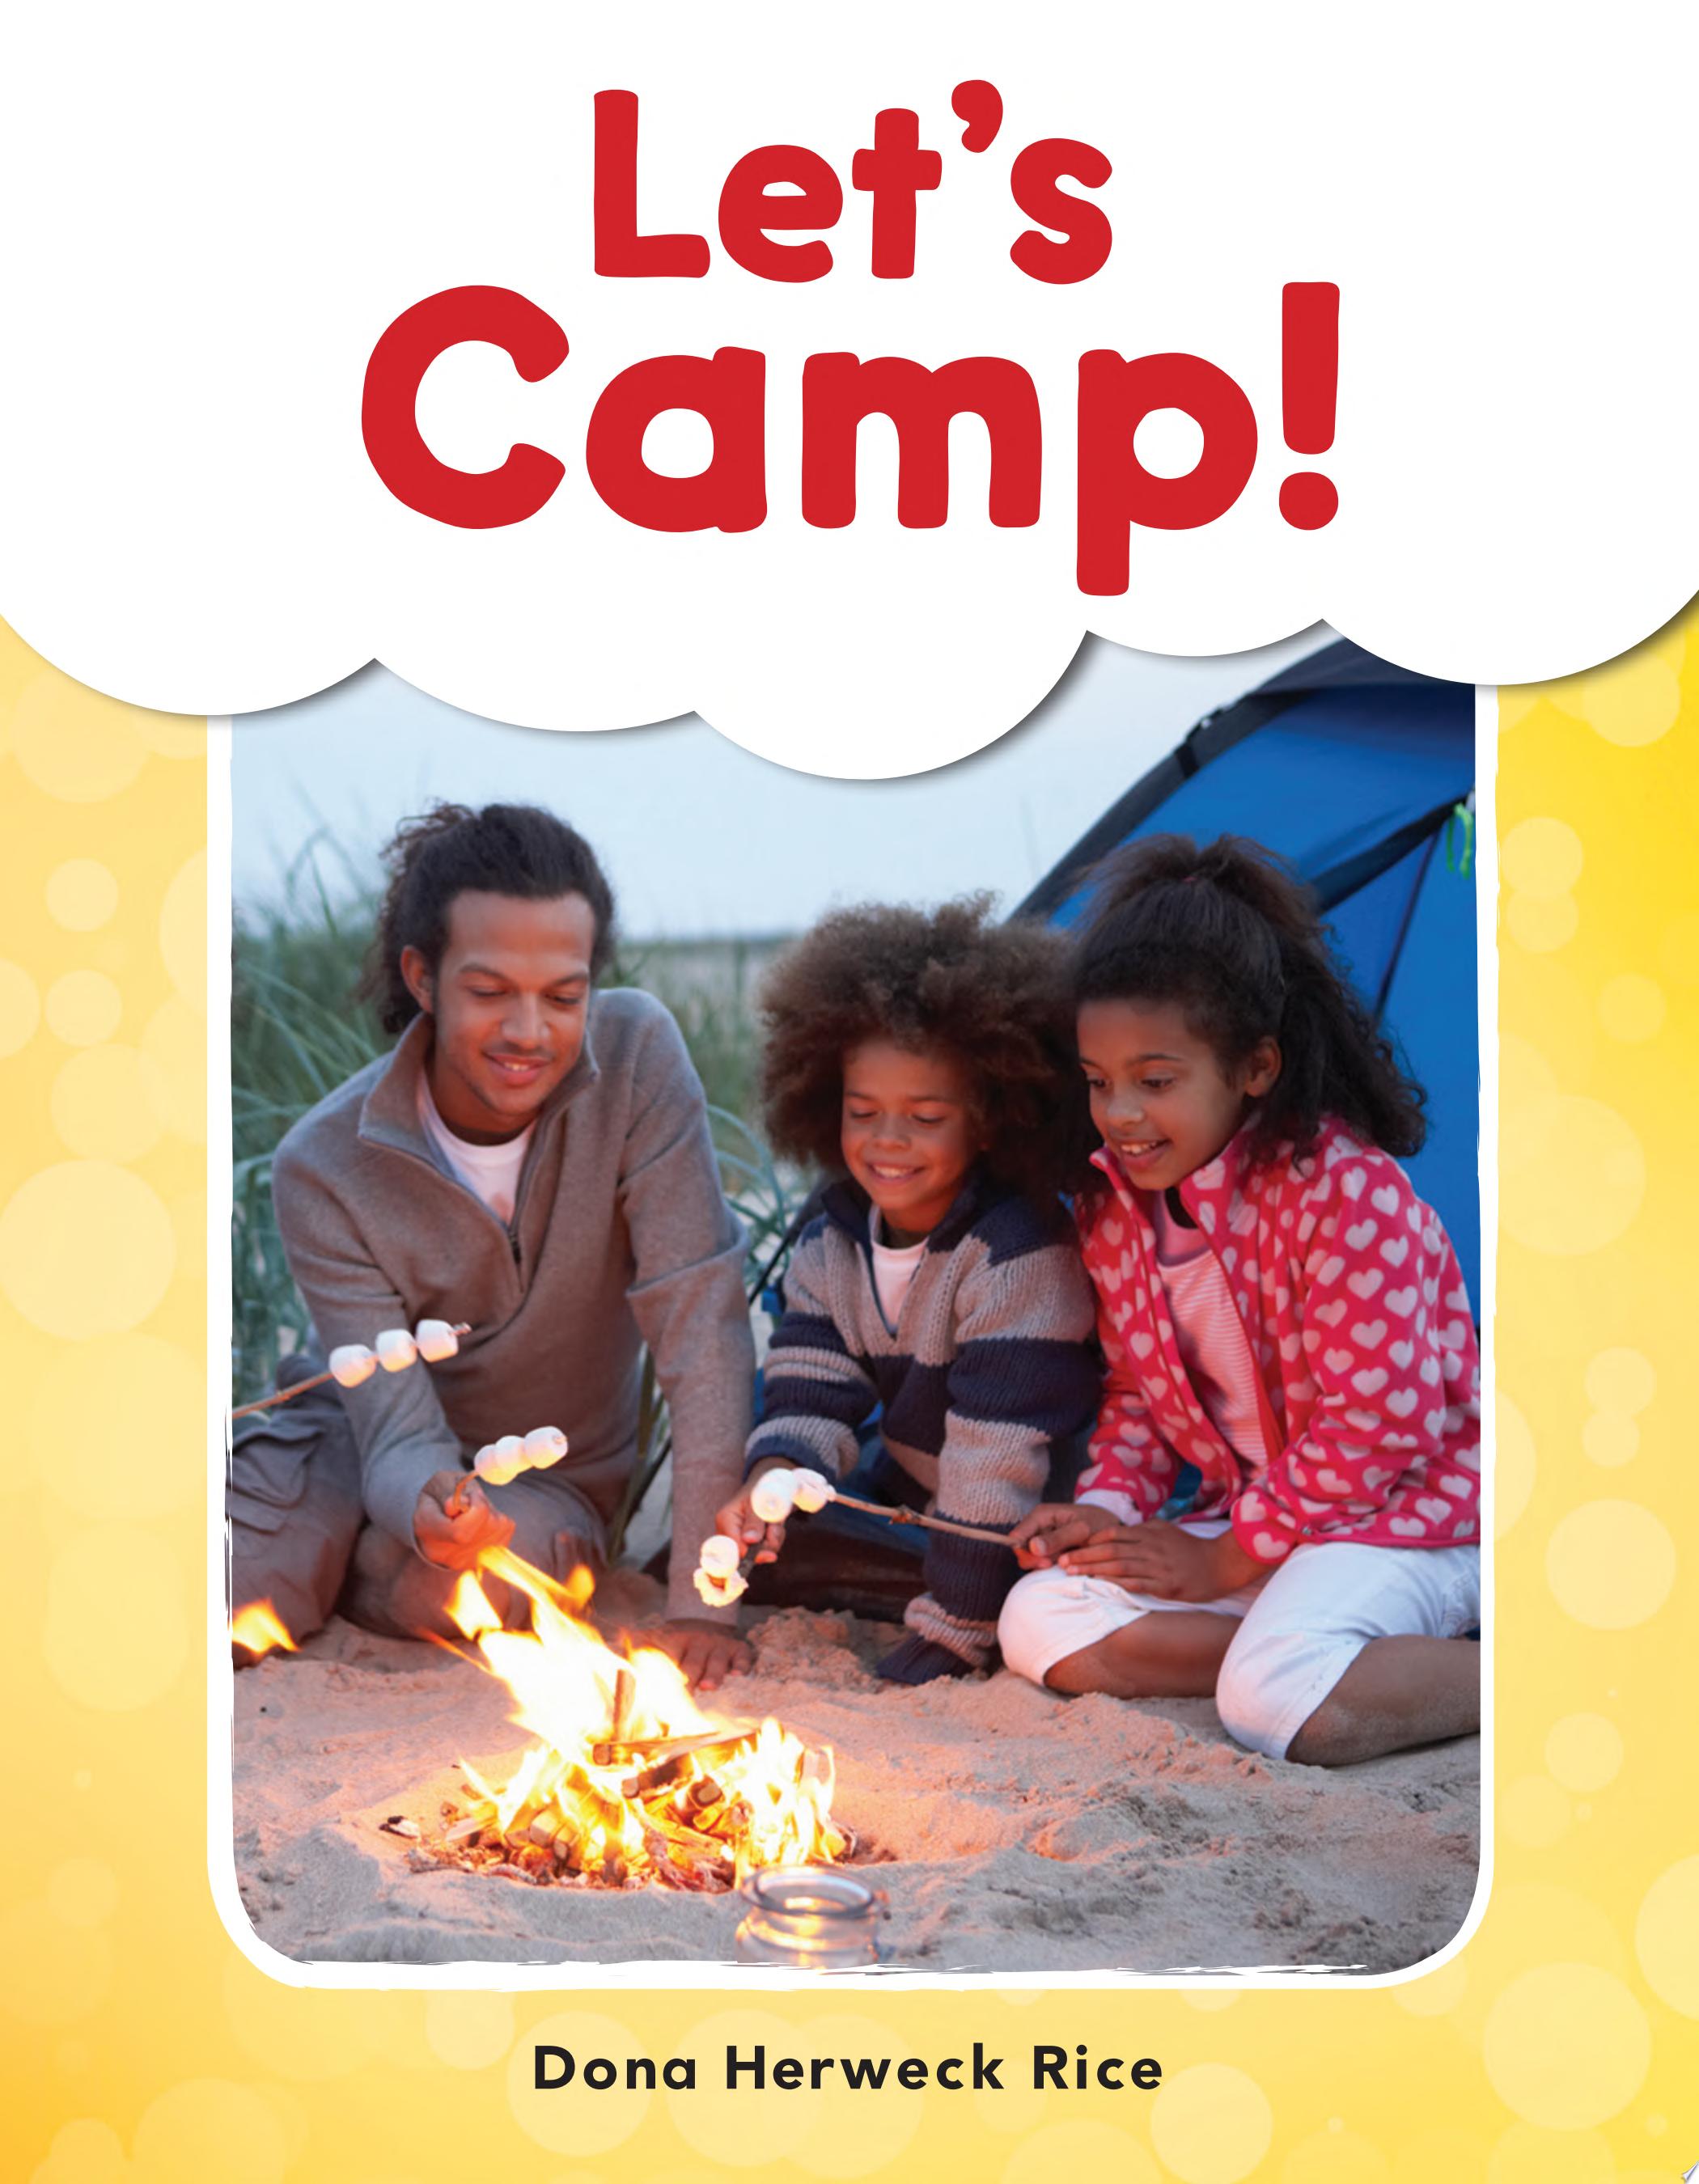 Image for "Lets Camp!"